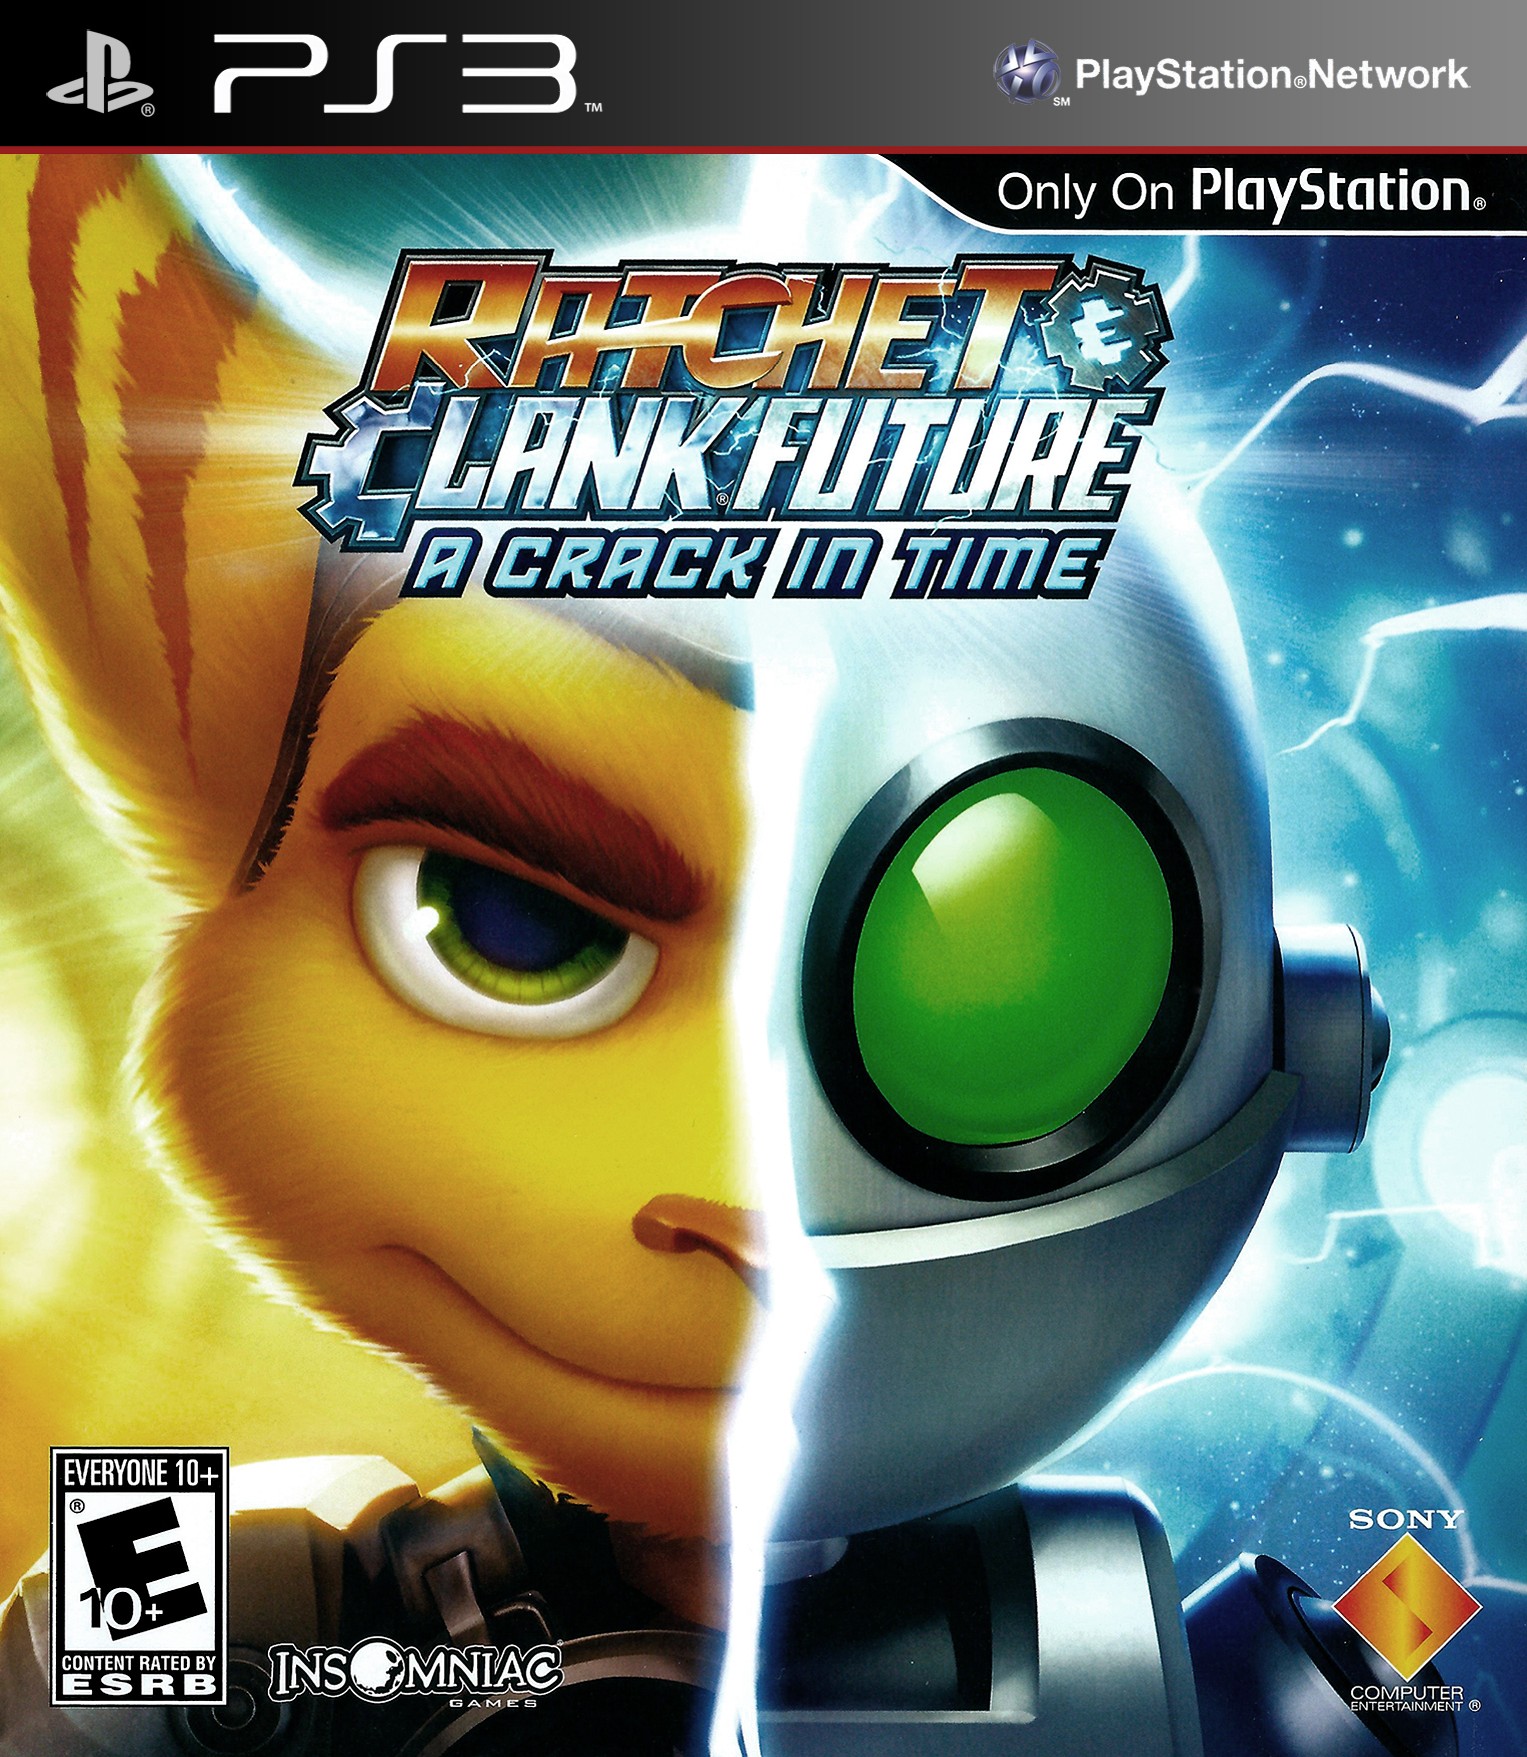 'Ratchet and Clank Future: A Crack in Time'